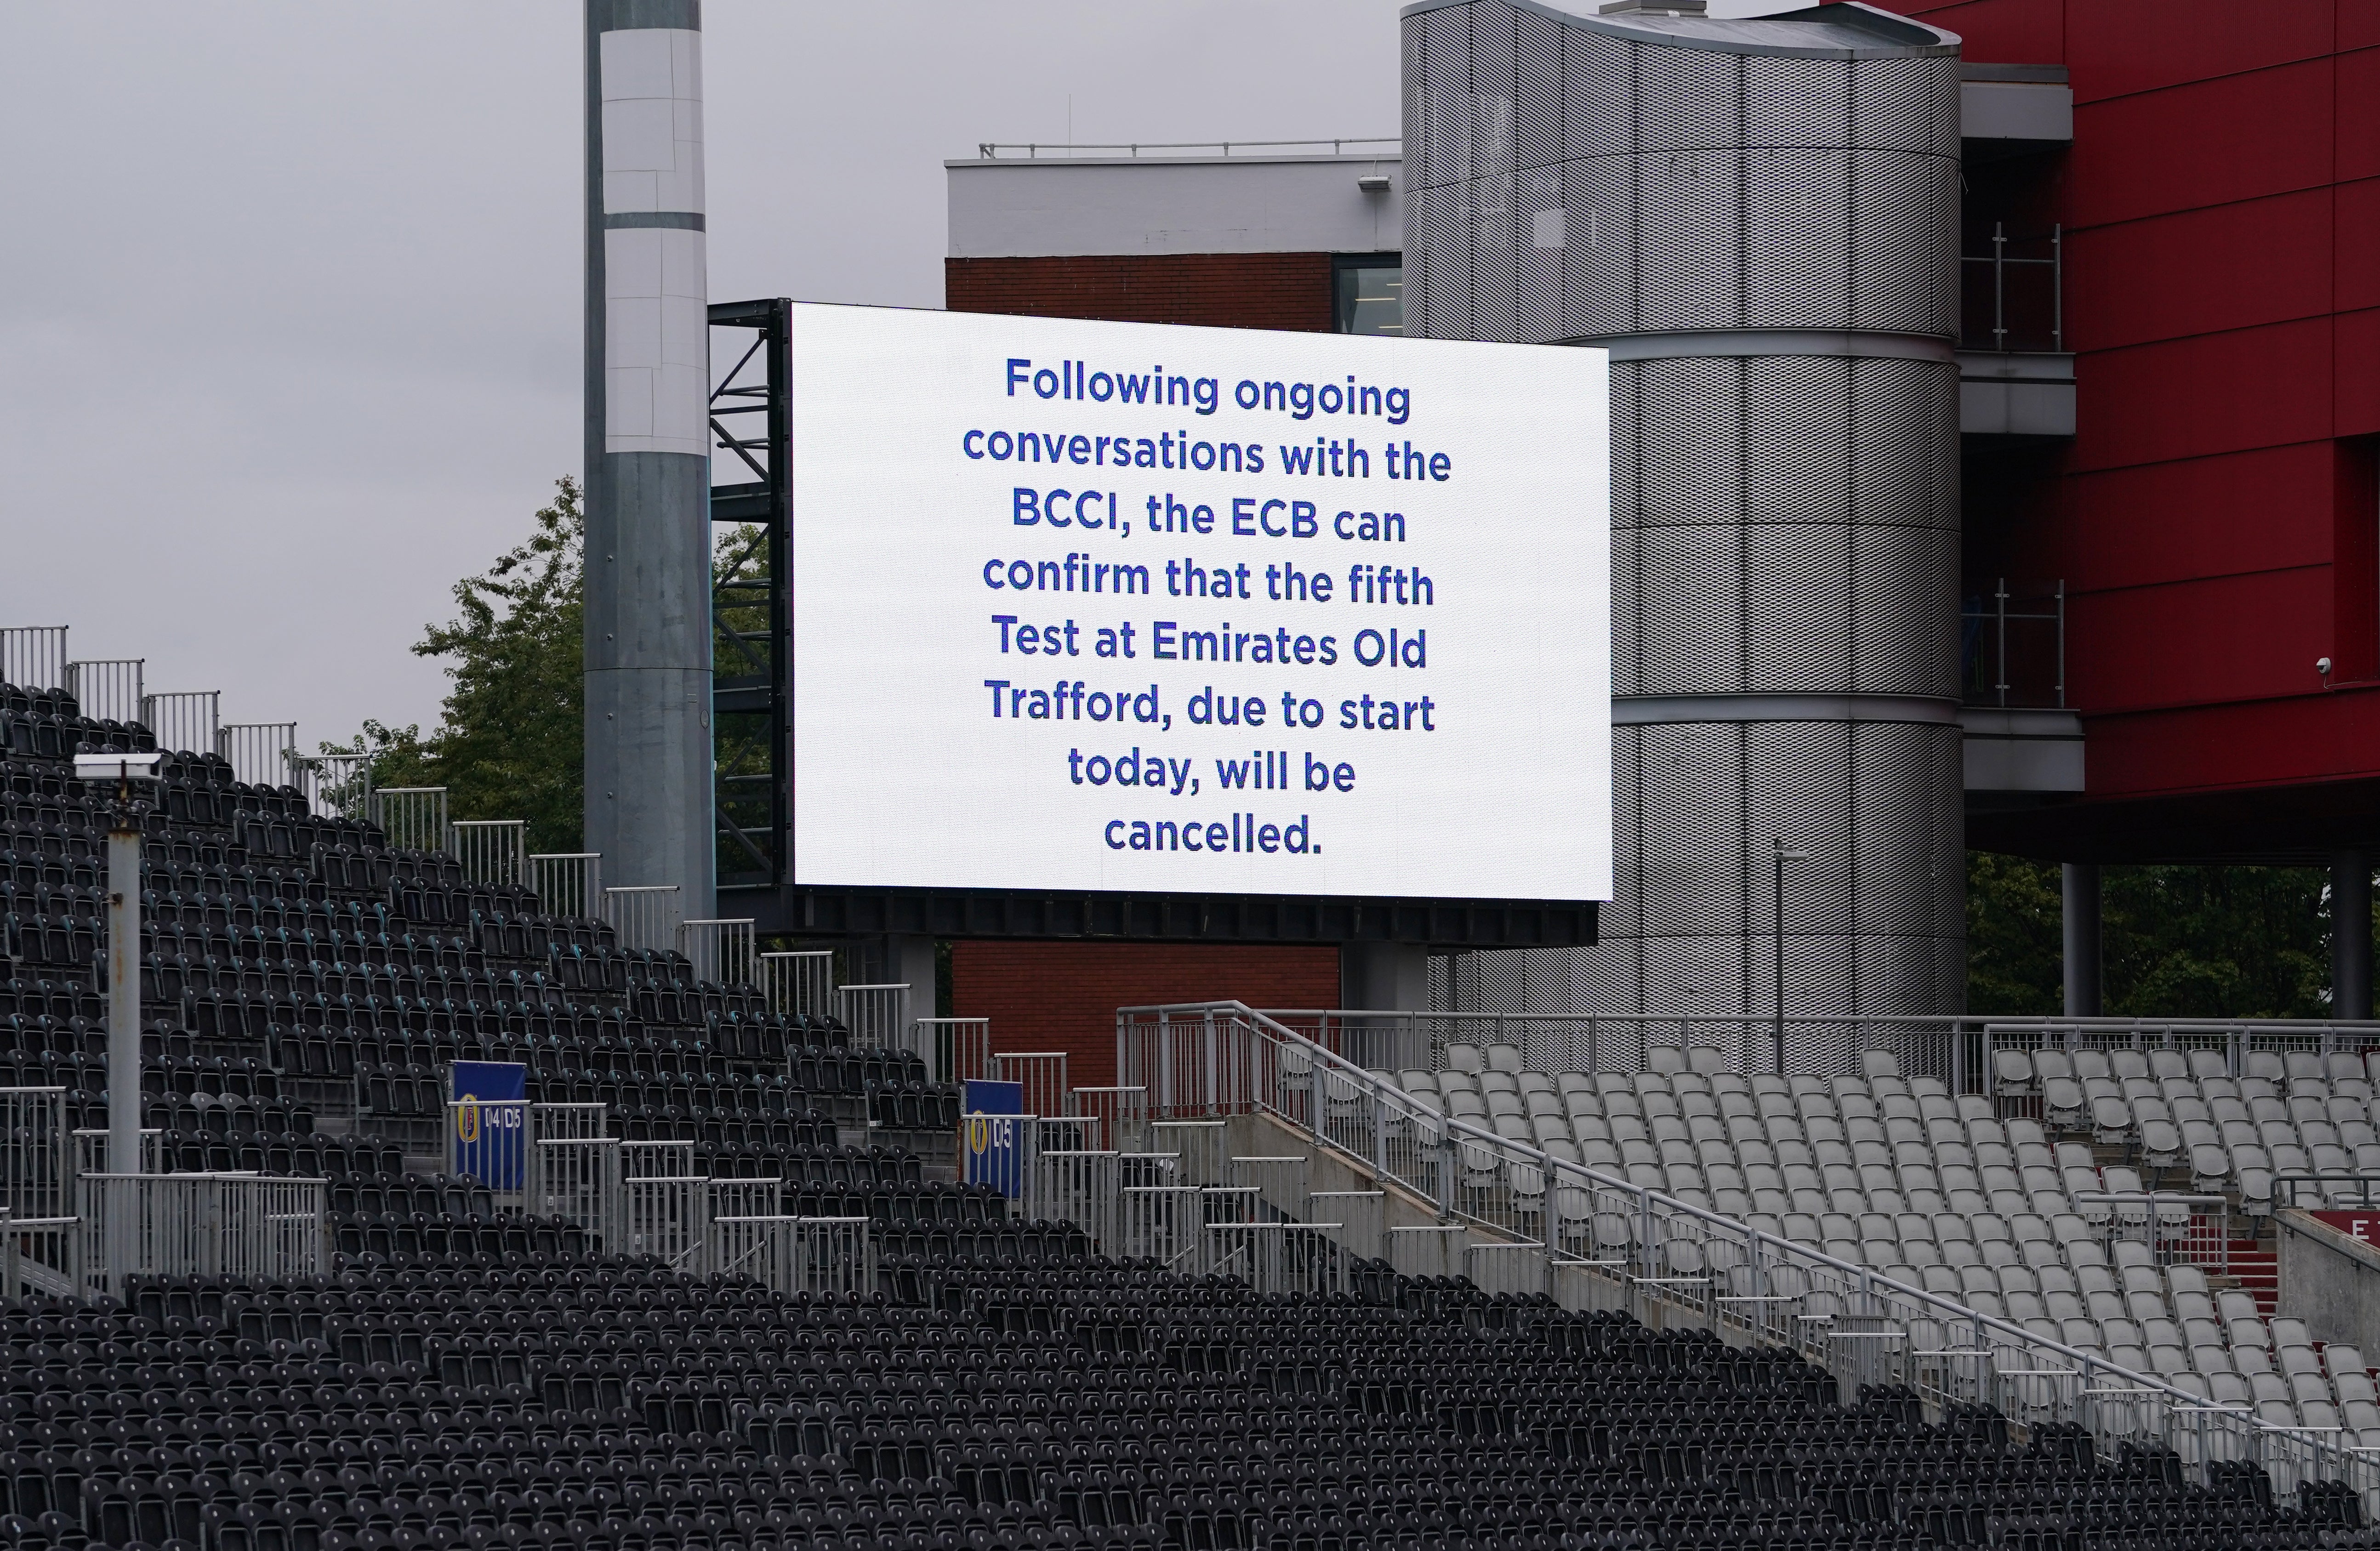 A message displayed at Emirates Old Trafford after the fifth Test between England and India was abandoned over Covid concerns (Martin Rickett/PA)